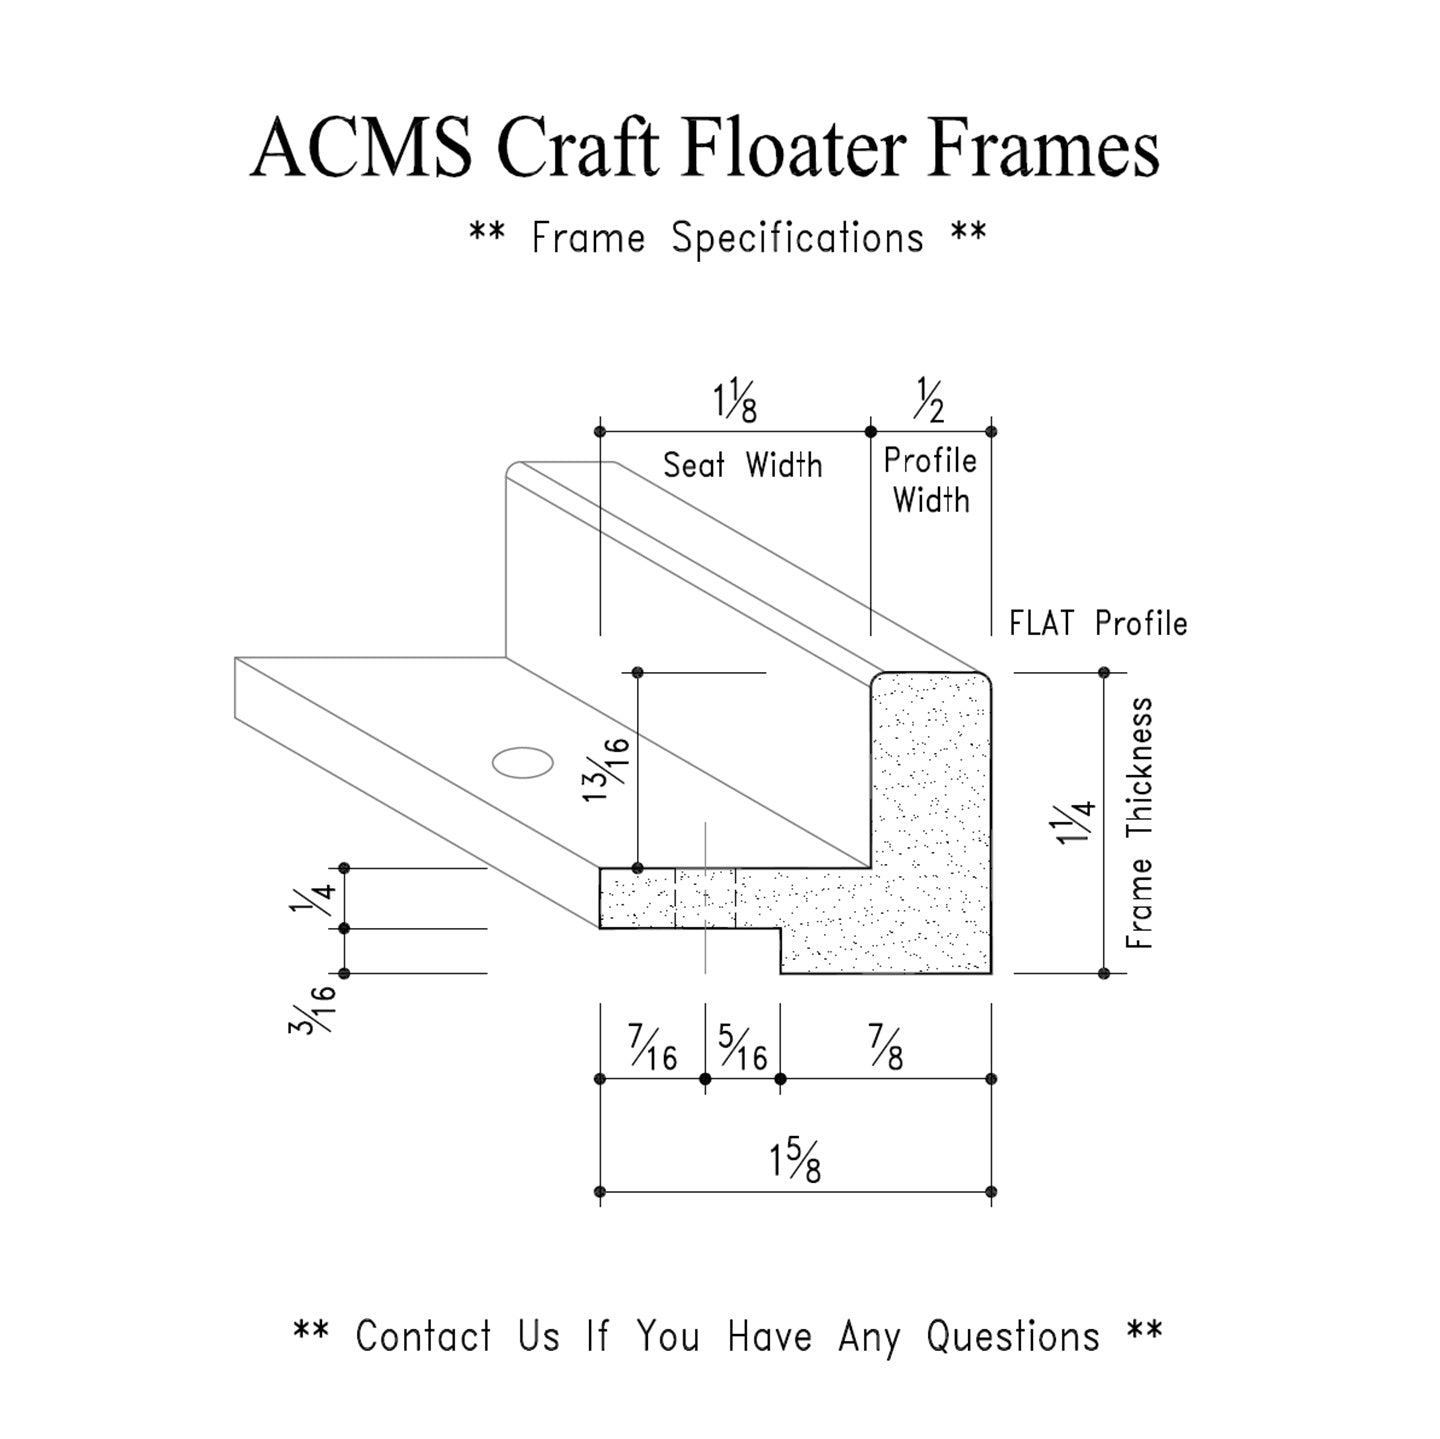 ACMS Capsule Craft Floater Frame - For 3/4" Thick Artwork - Profile 3/4" FLAT - 1 1/4" Thick Frame